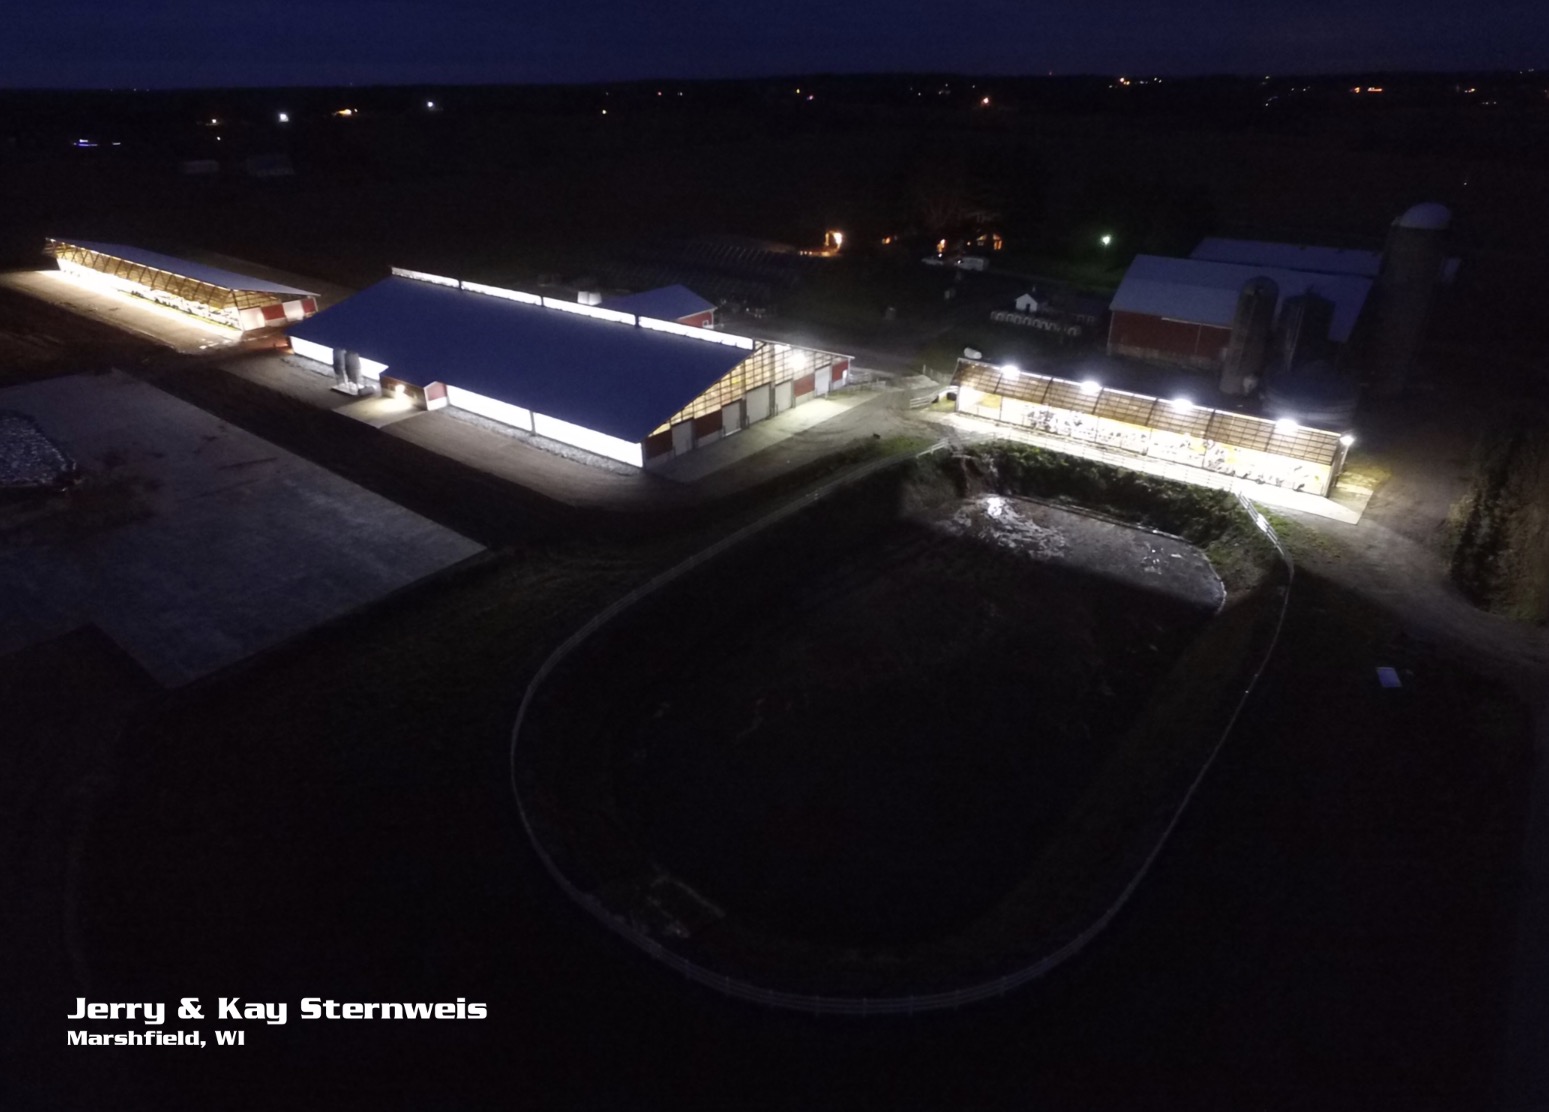 Agricultural Construction: Robot Dairy & Calf Barn:  Jerry & Kay Sternweis, Marshfield, WI